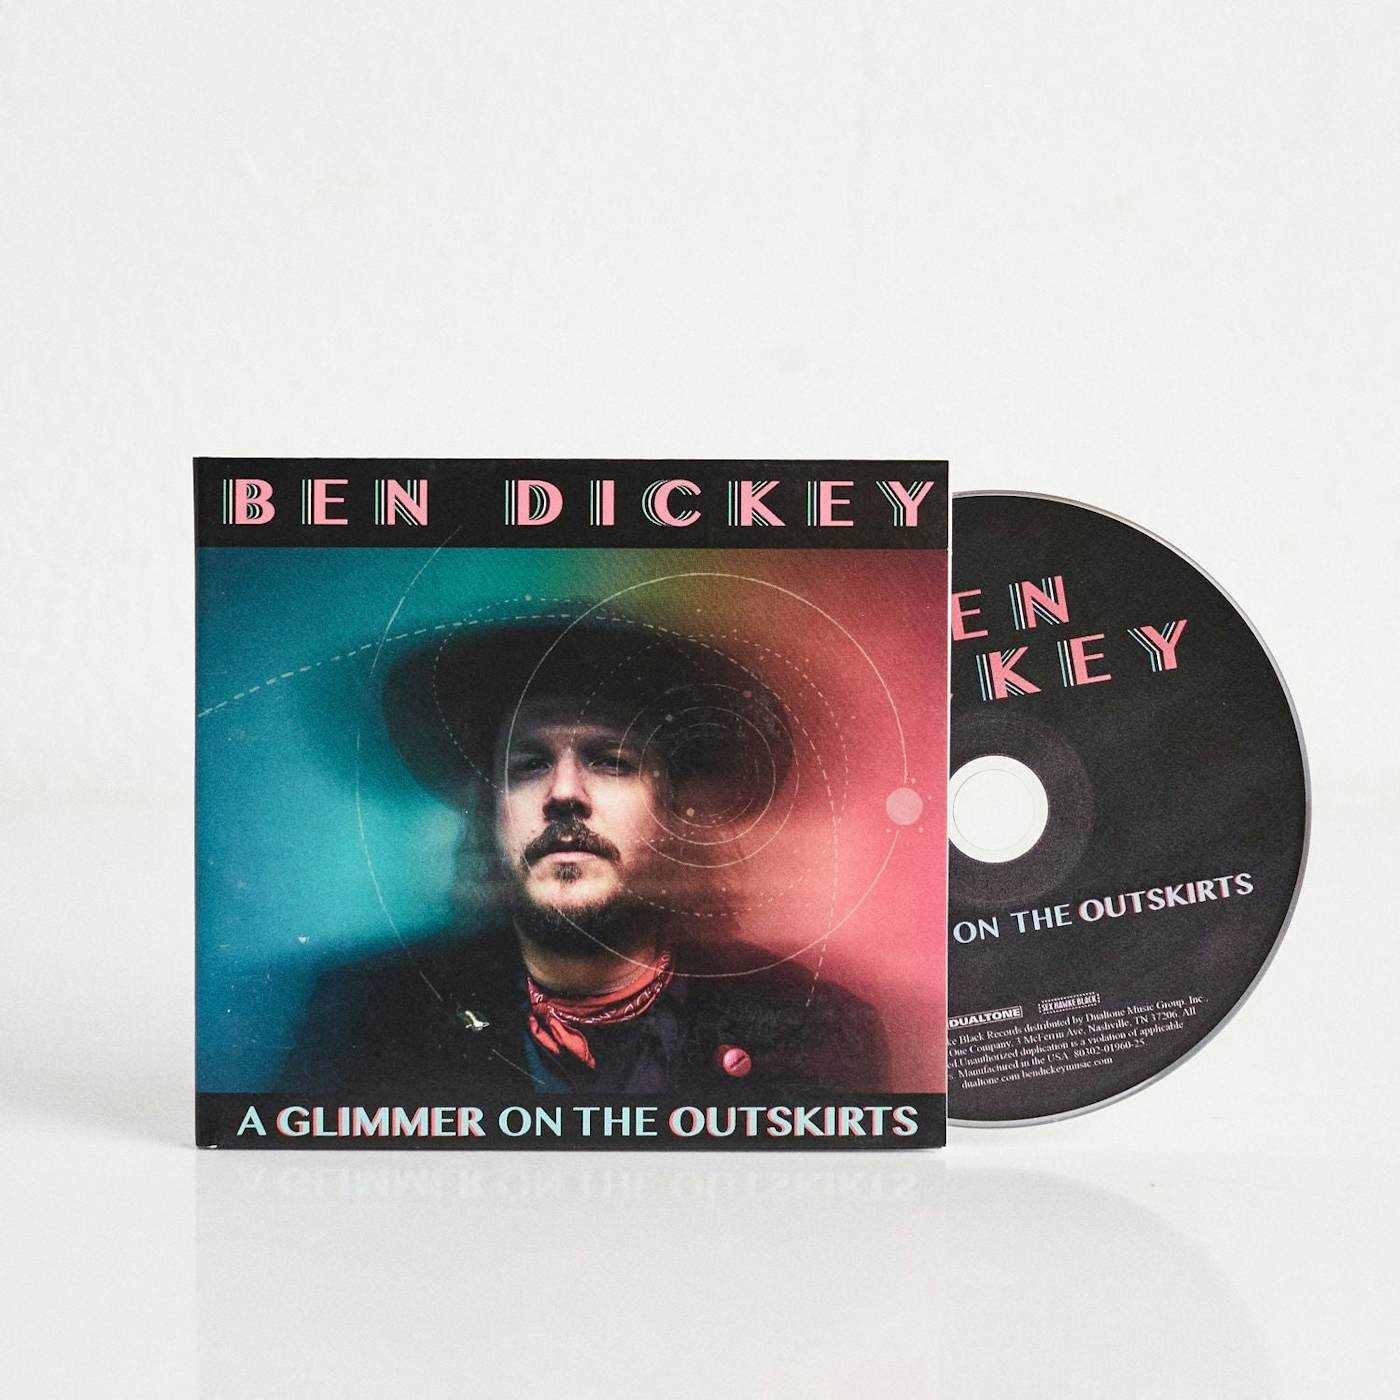 Ben Dickey A Glimmer on the Outskirts (CD)